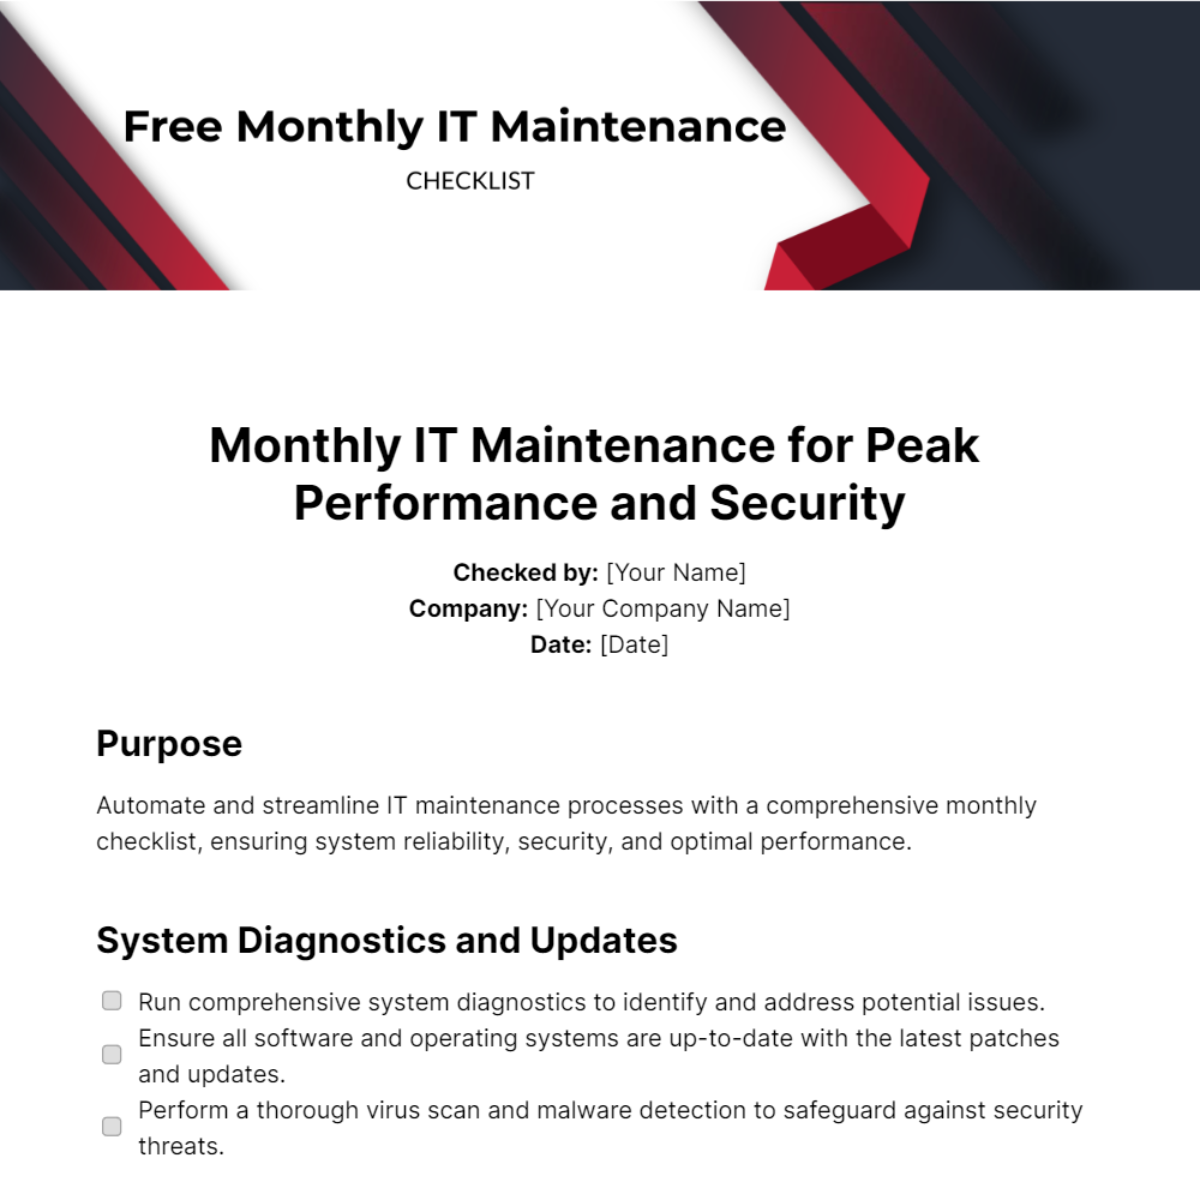 Free Monthly IT Maintenance Checklist Template